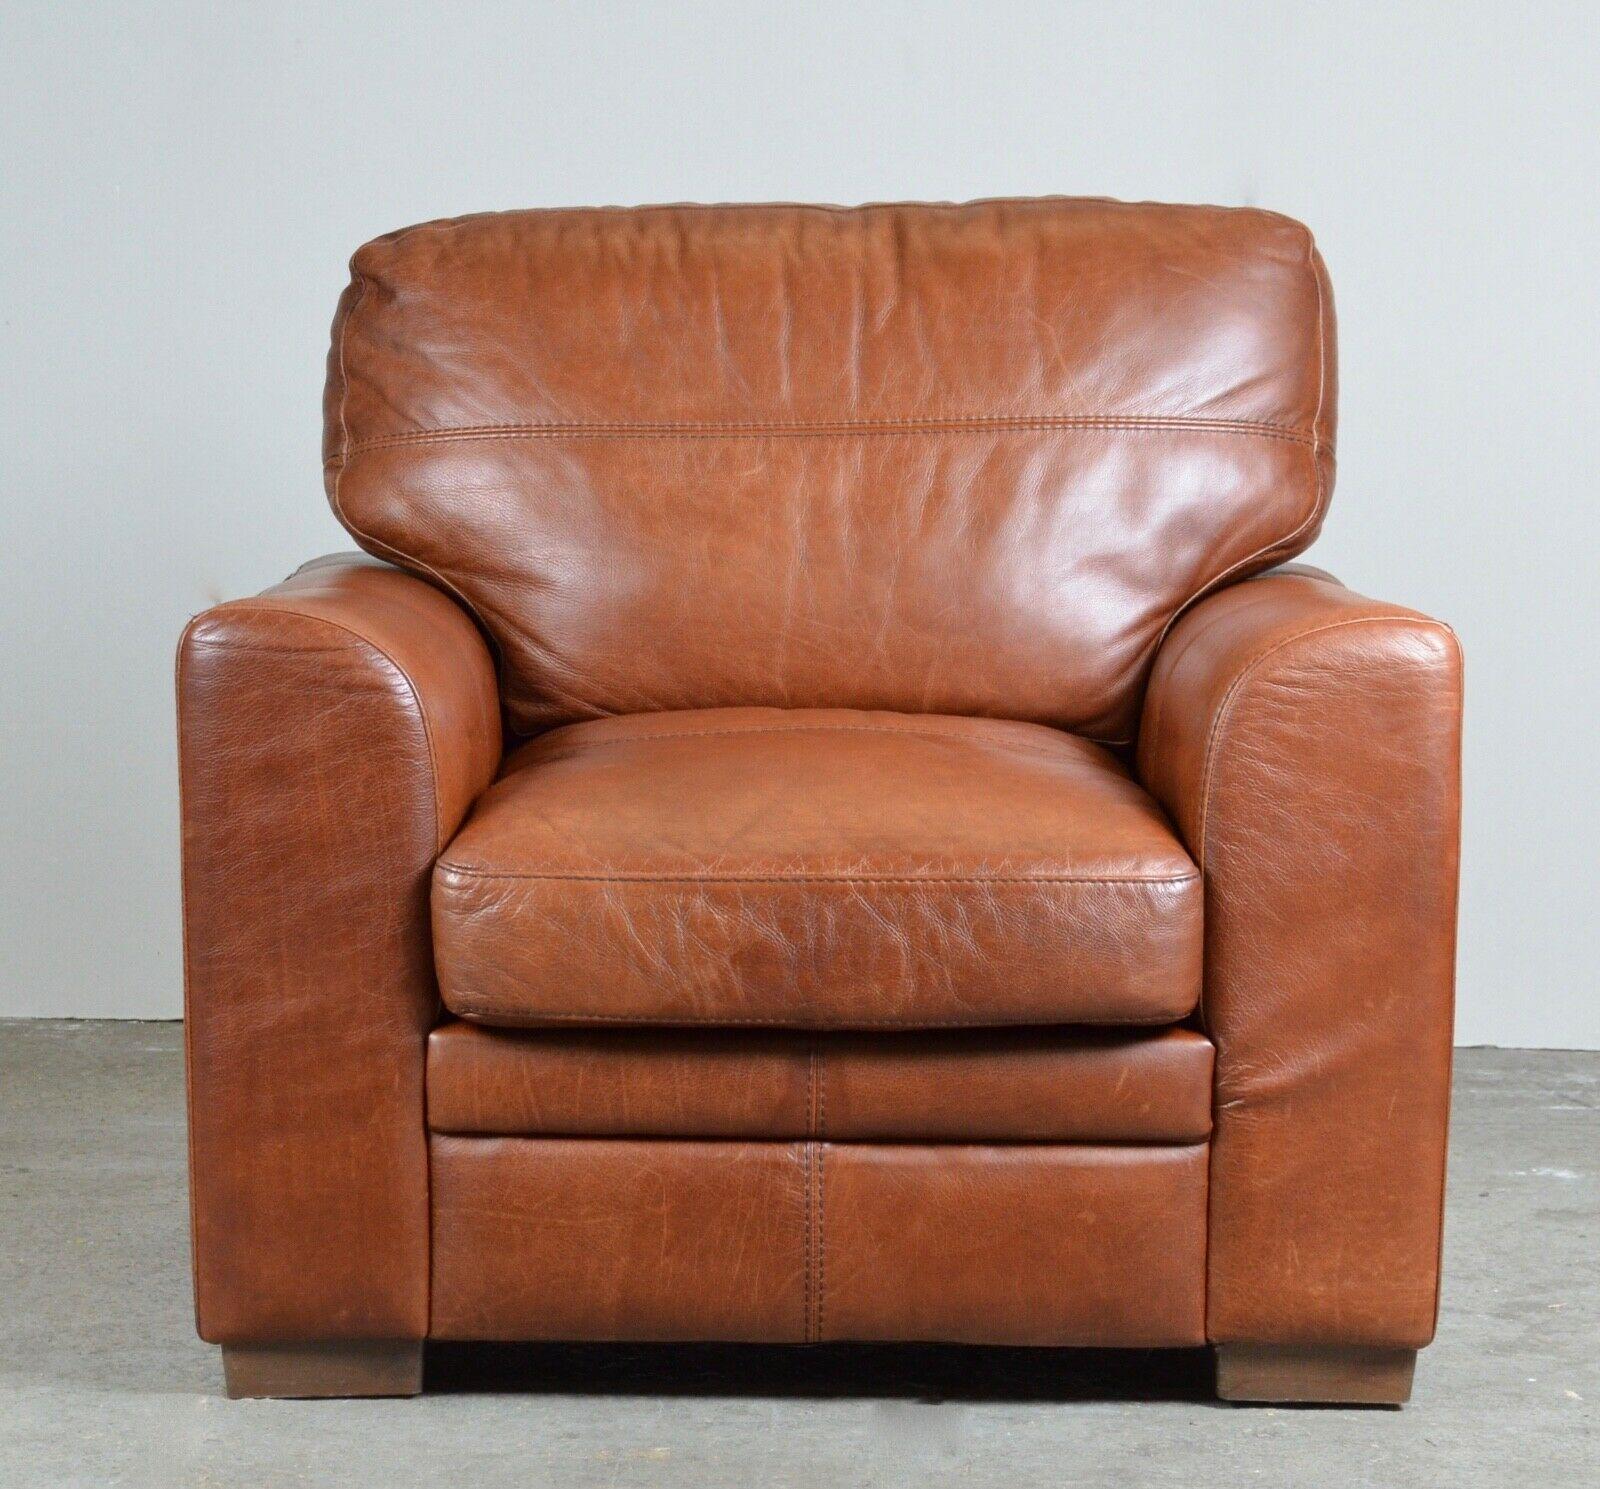 We are delighted to offer for sale this luxury Viva Italian designer tan leather armchair and matching footstool.
A stunning designer collection with boastful proportions. This armchair range features large arms with deep seats and extra sumptuous